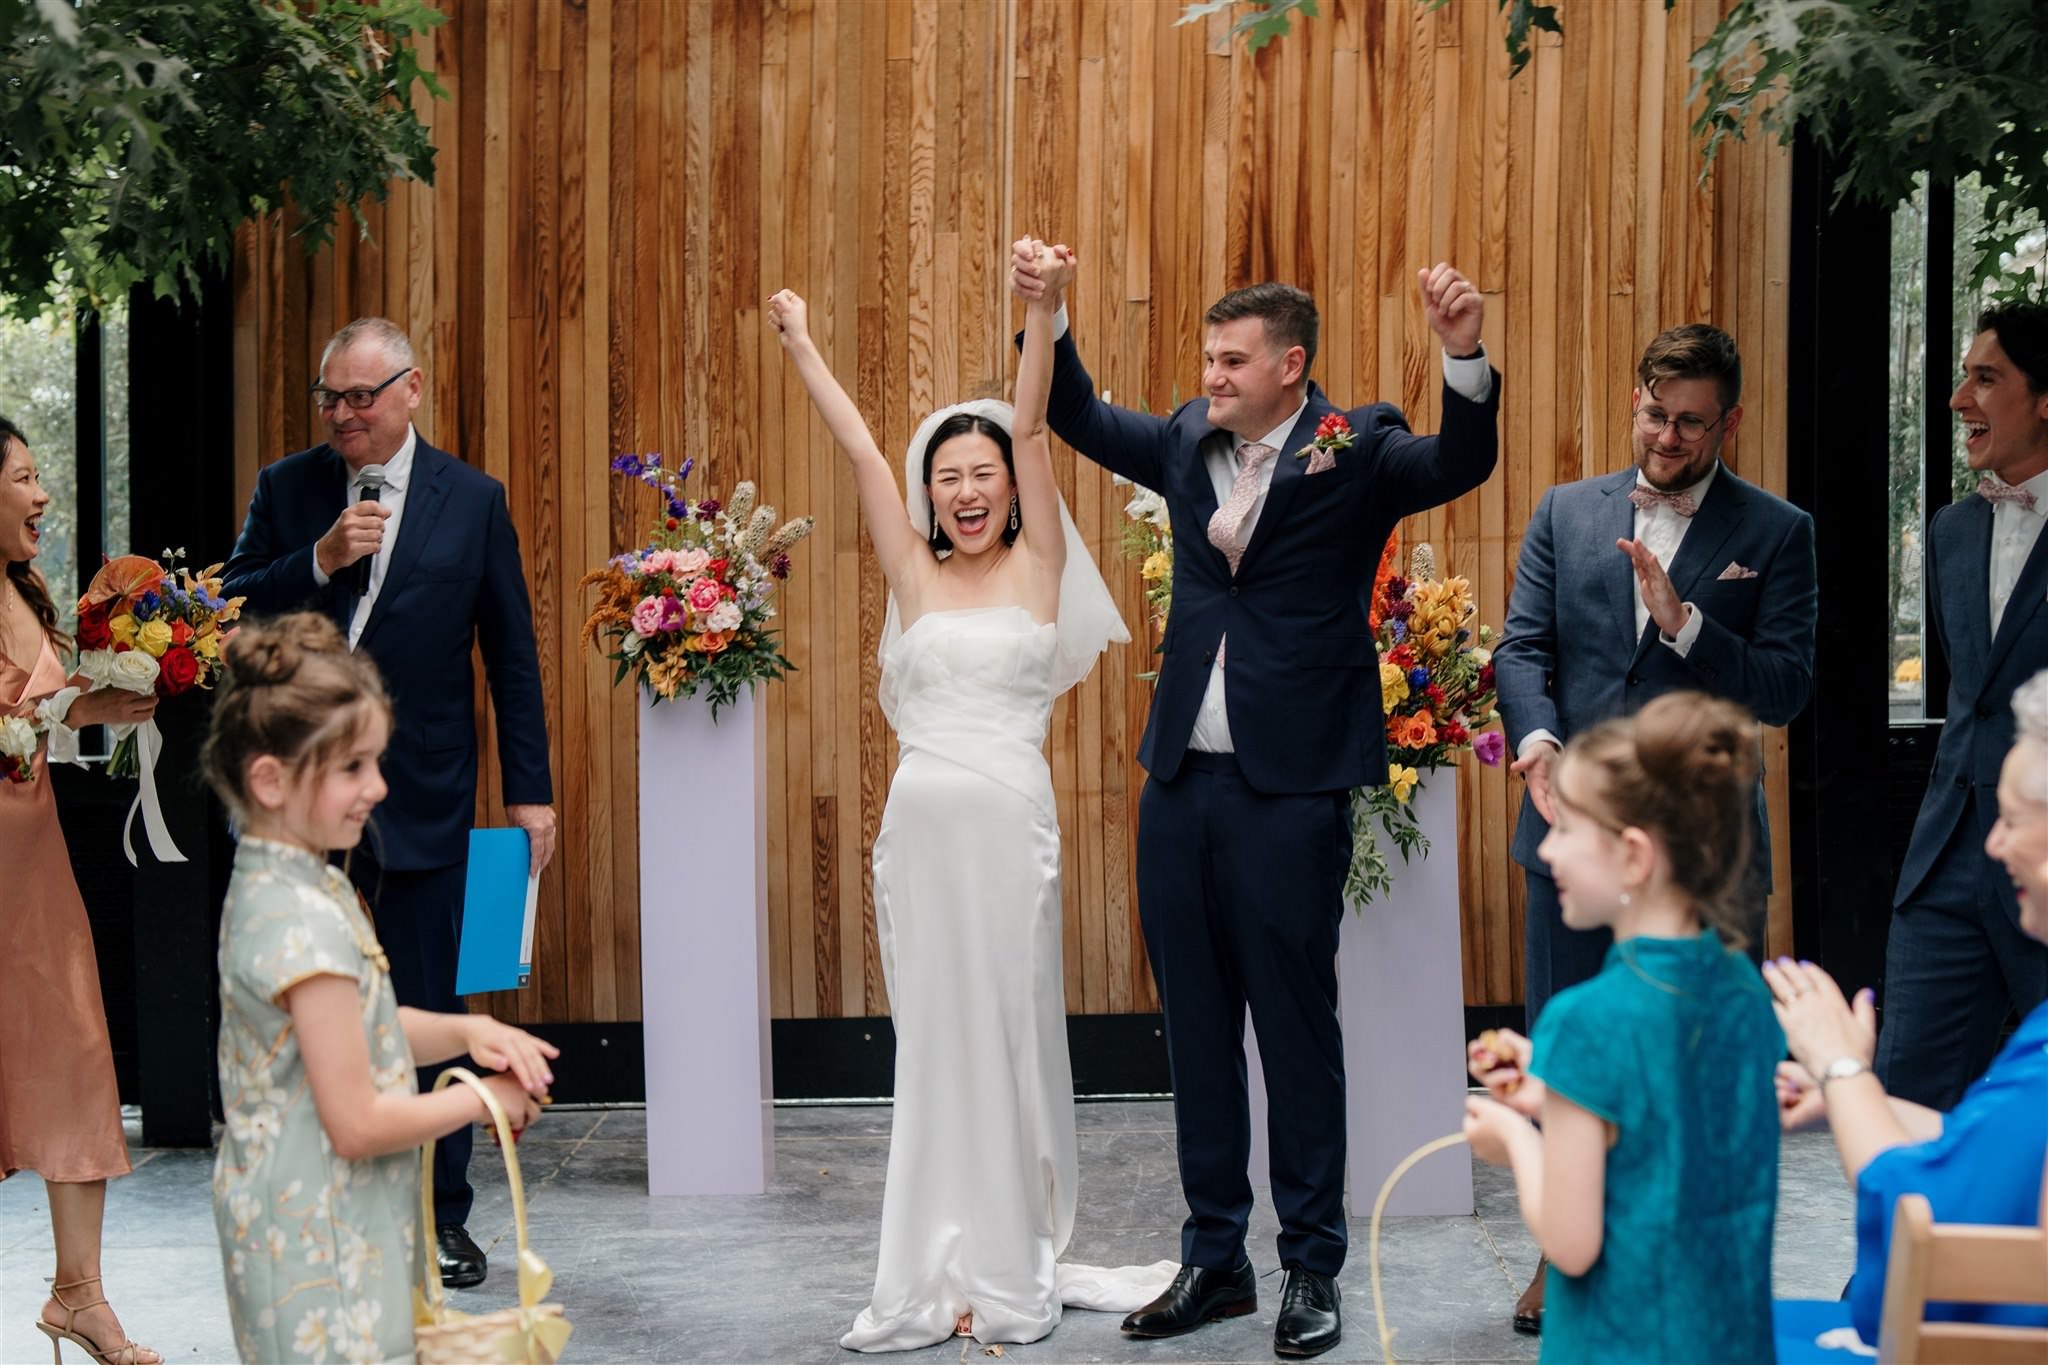 glasshouse-morningside-urban-best-auckland-wedding-venue-central-indoor-photographer-videographer-dear-white-productions-top-industrial-chinese-ceremony-tradition (73).jpg